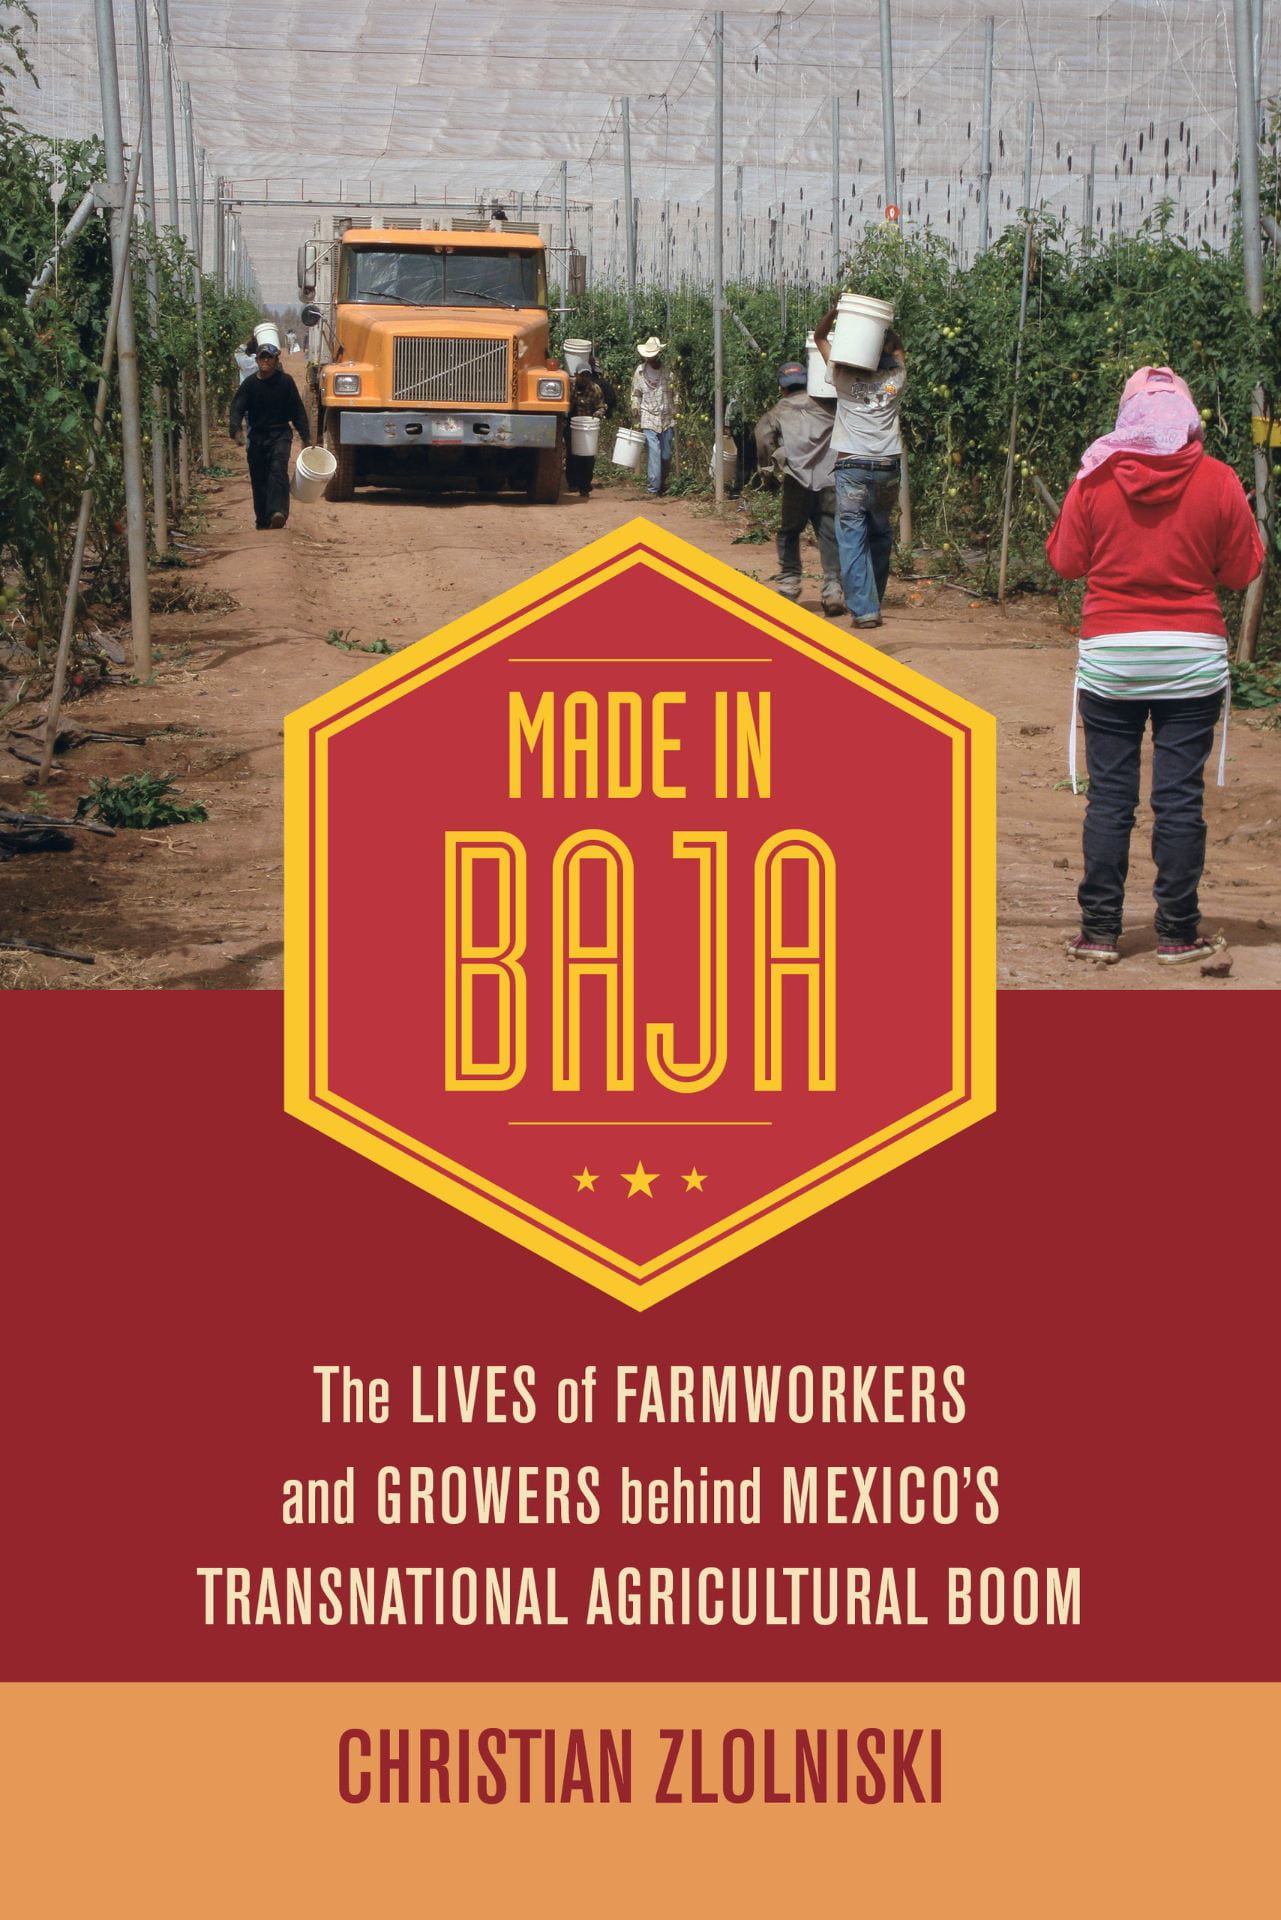 Book cover for "Made in Baja"